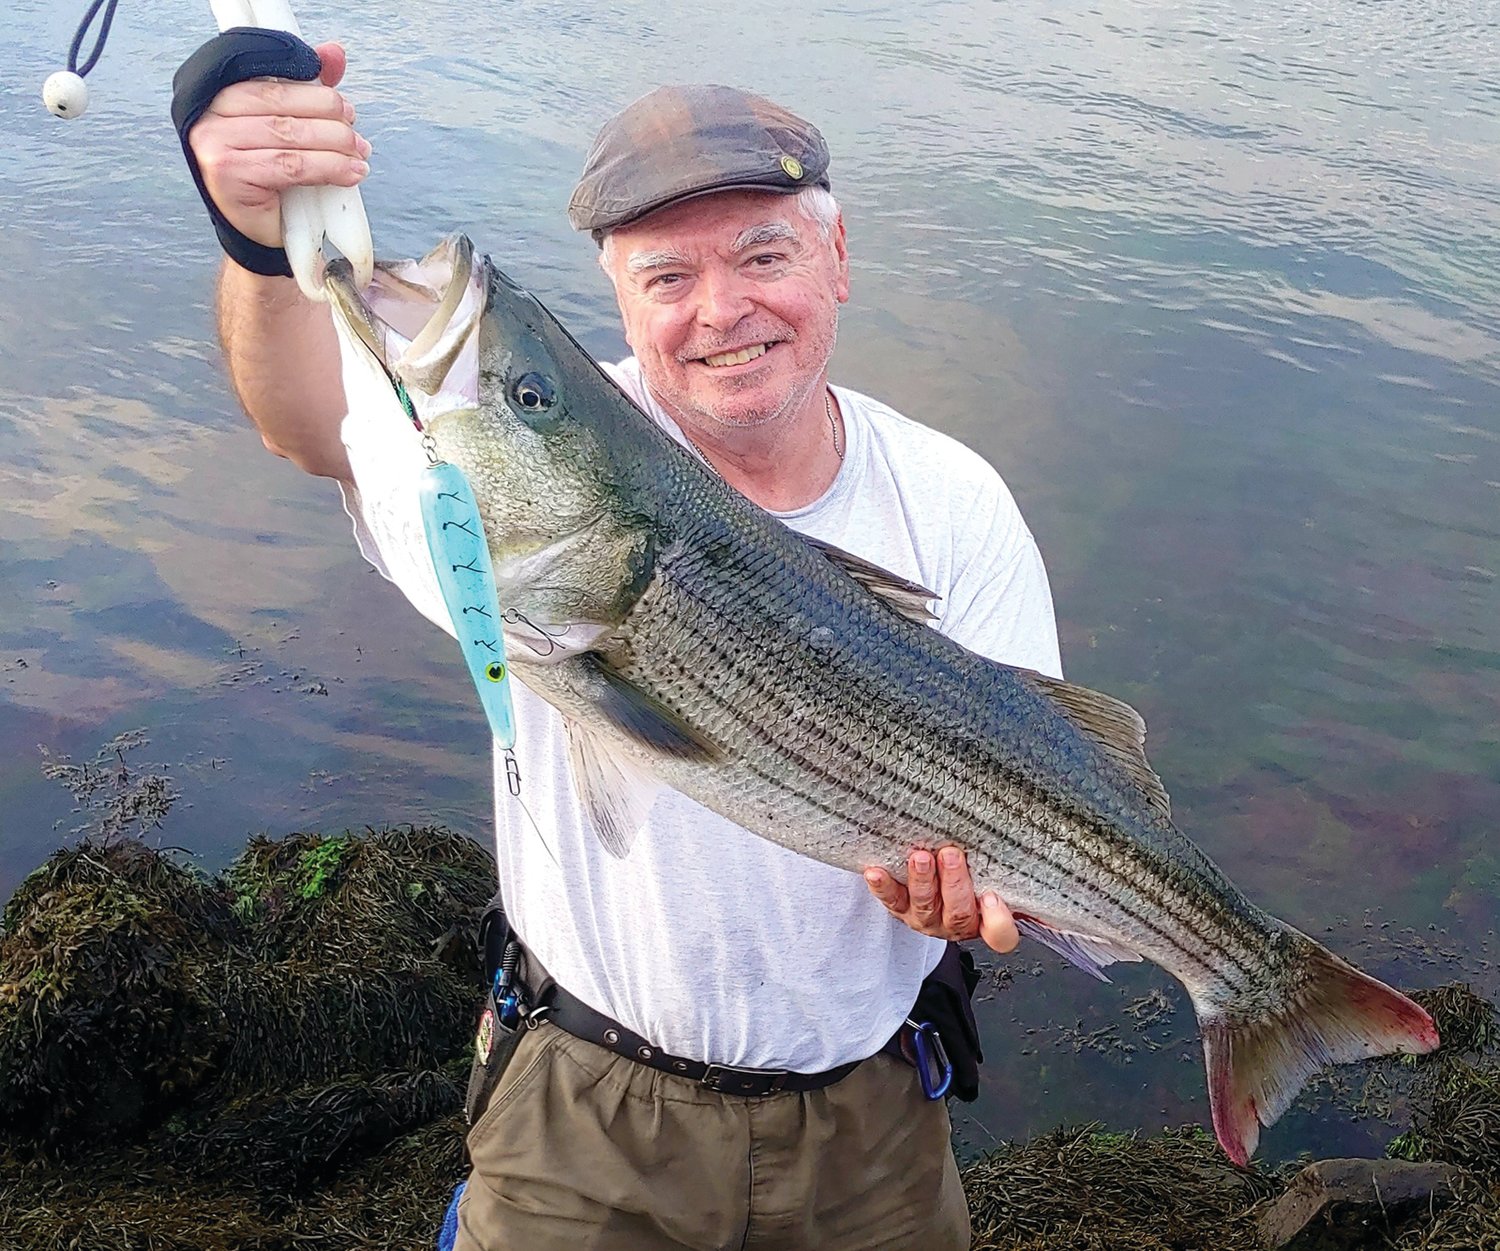 Striped bass reductions working, need to formalize conservation measures